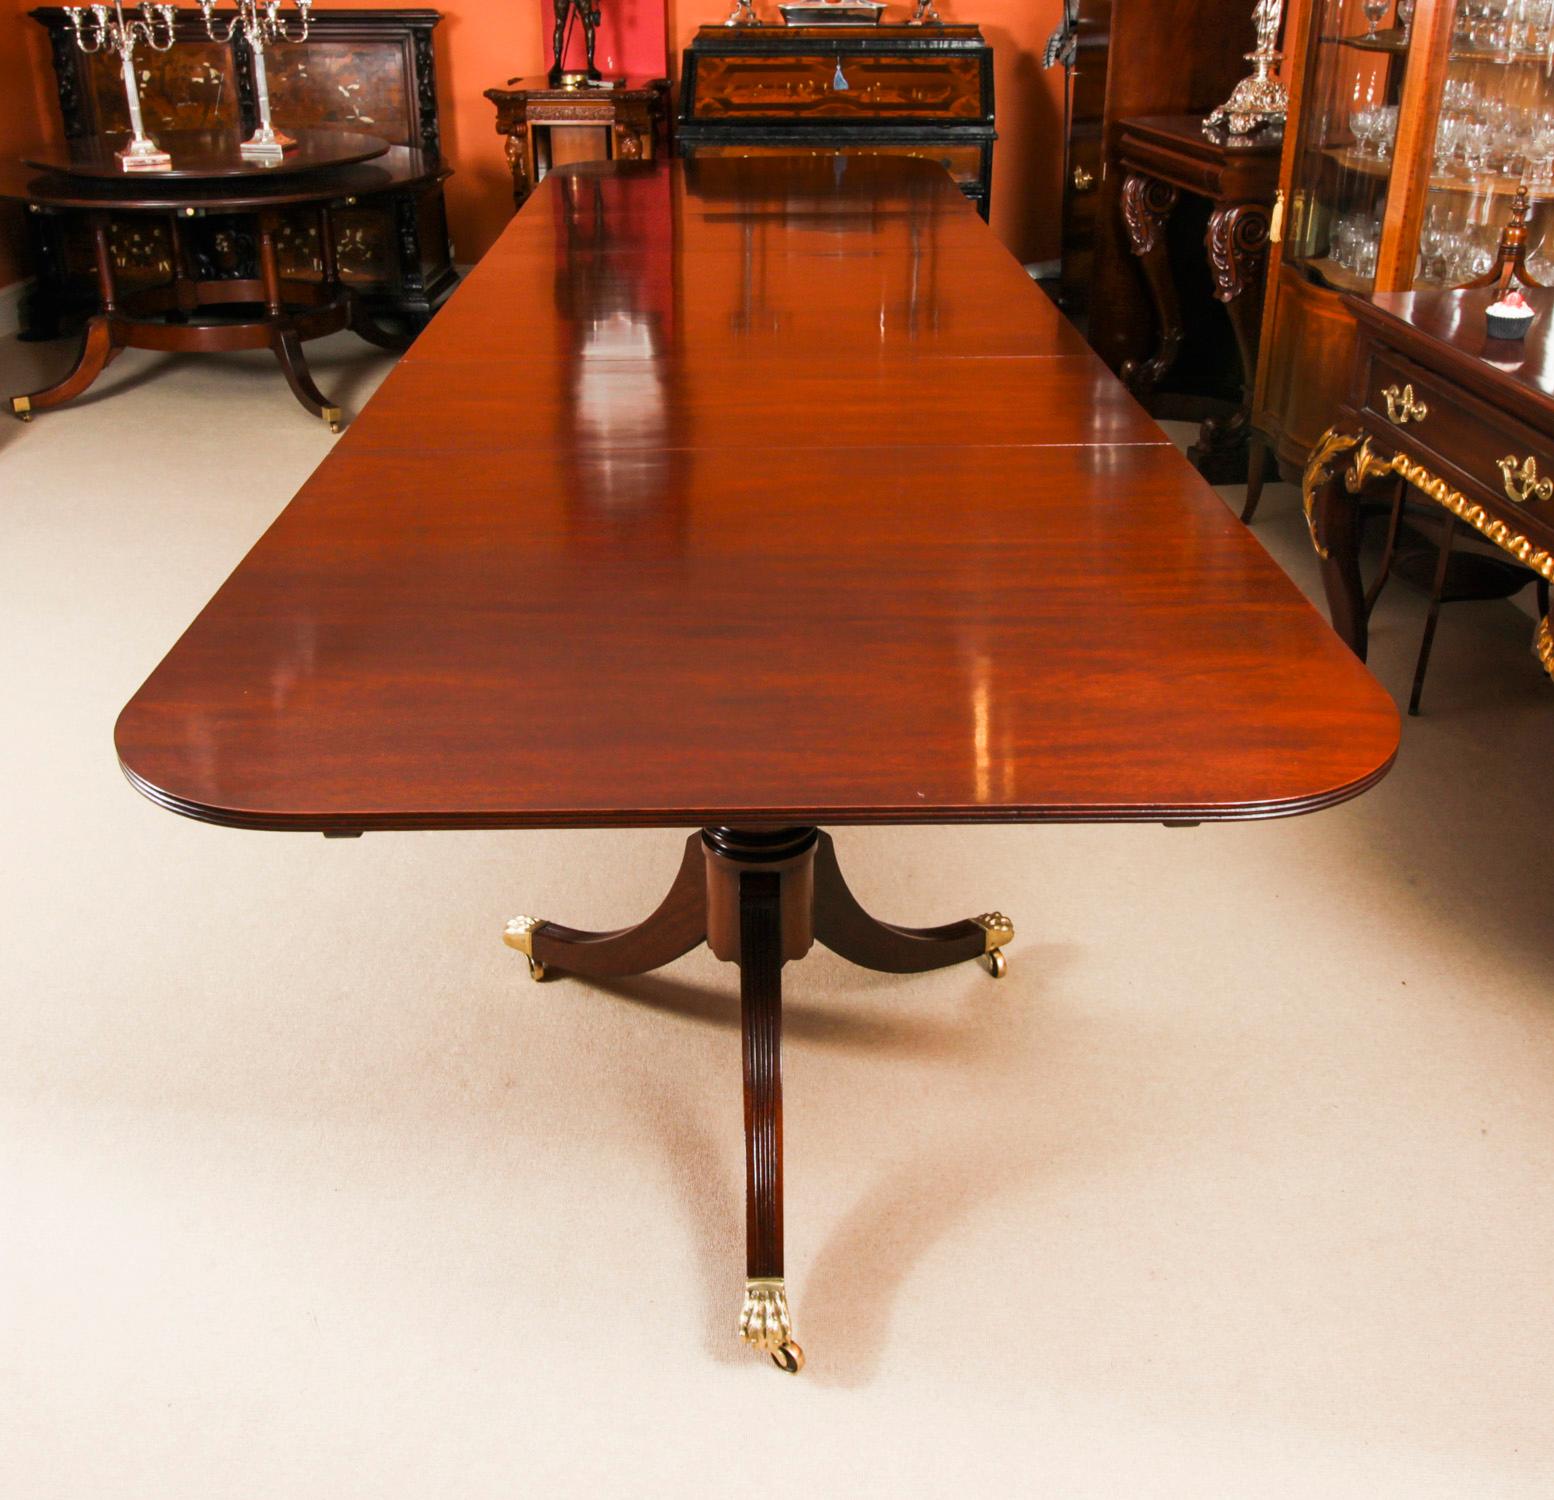 This is a superb large Vintage handmade triple pedestal dining table in elegant George III style, by the master cabinetmakers Arthur Brett & Son, Norwich, crafted in flame mahogany, dating from the mid-20th century.

Capable of seating sixteen